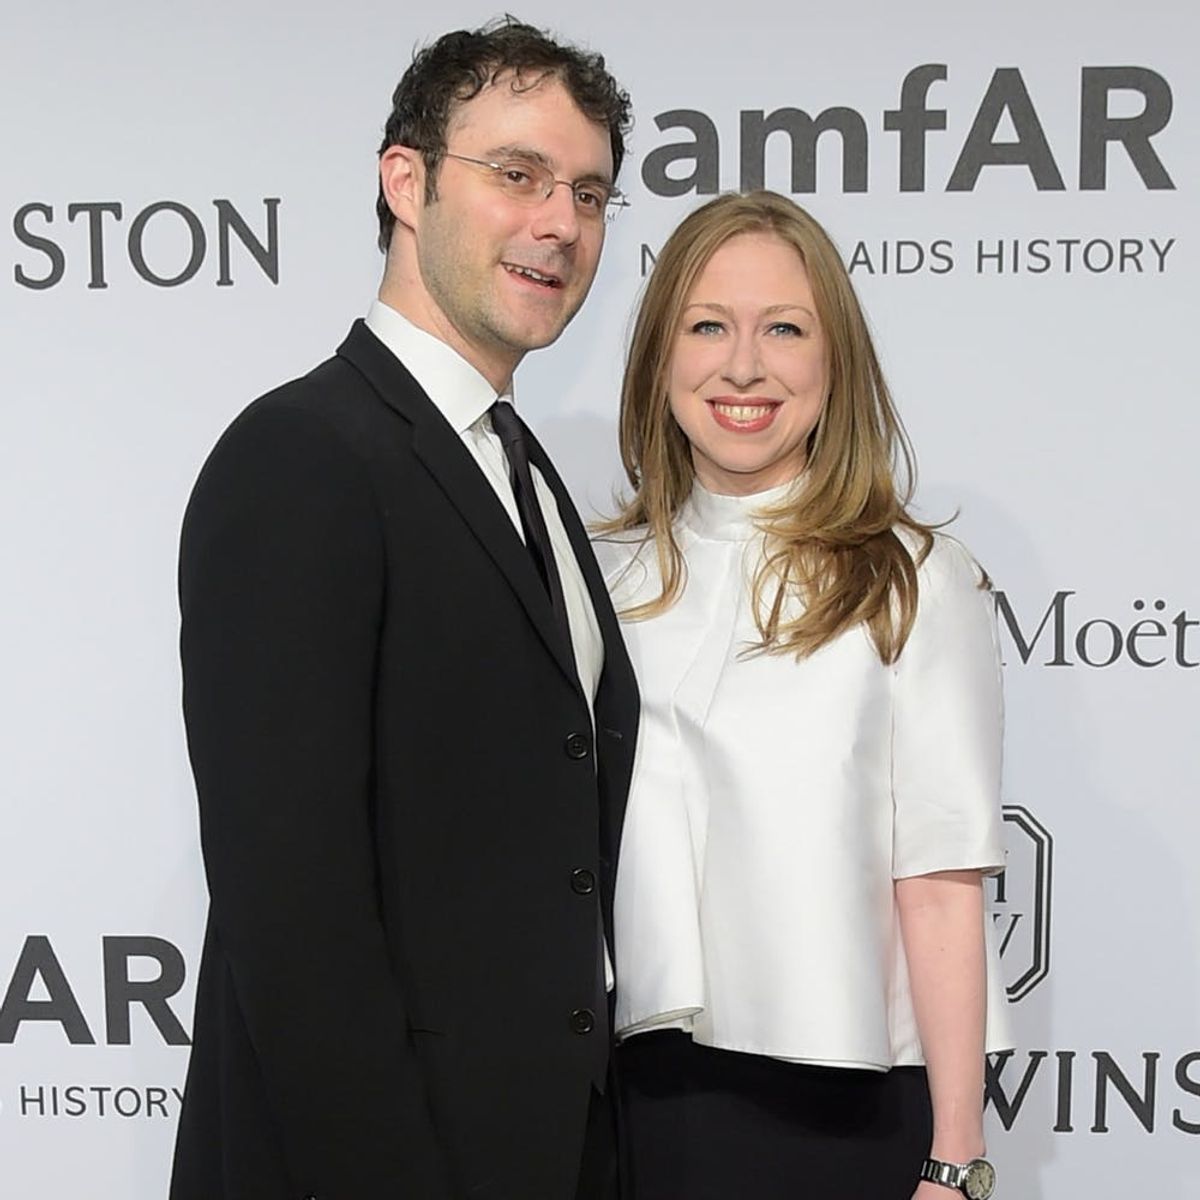 These Are the Adorable First Photos of Chelsea Clinton’s Baby Meeting His Grandparents on Father’s Day